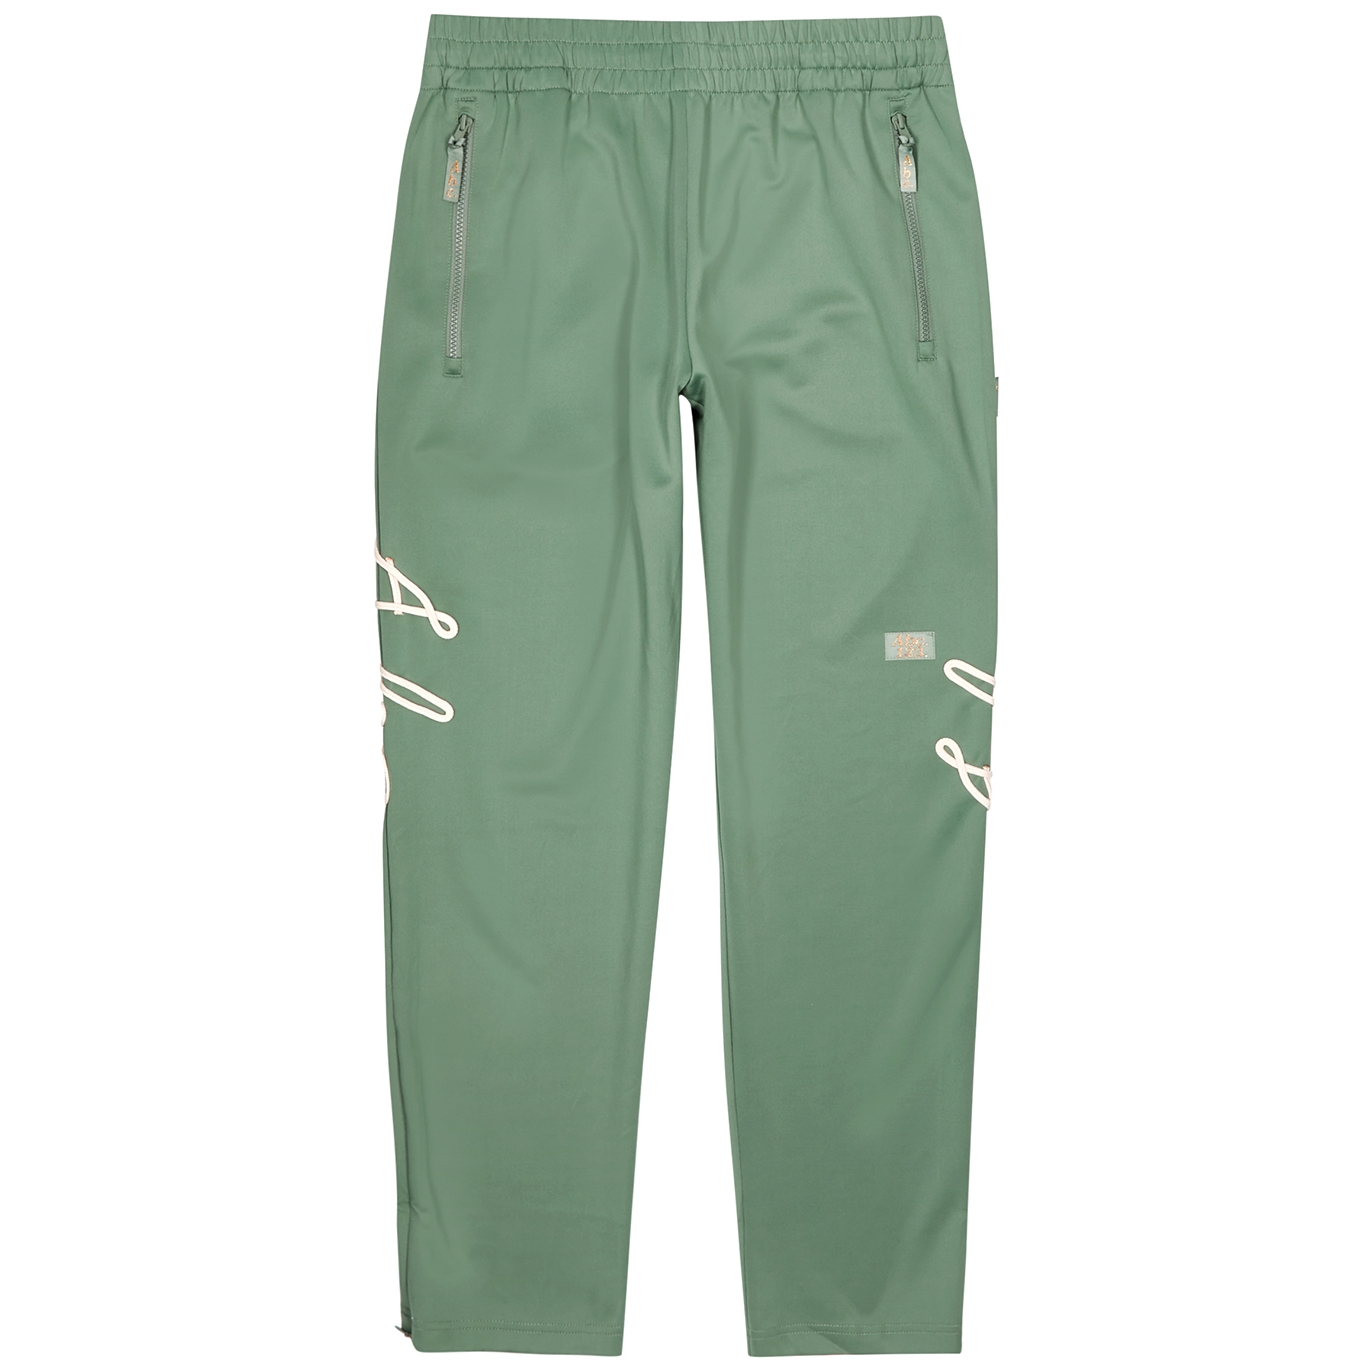 Advisory Board Crystals Logo-embroidered Stretch-jersey Track Pants - Green - S